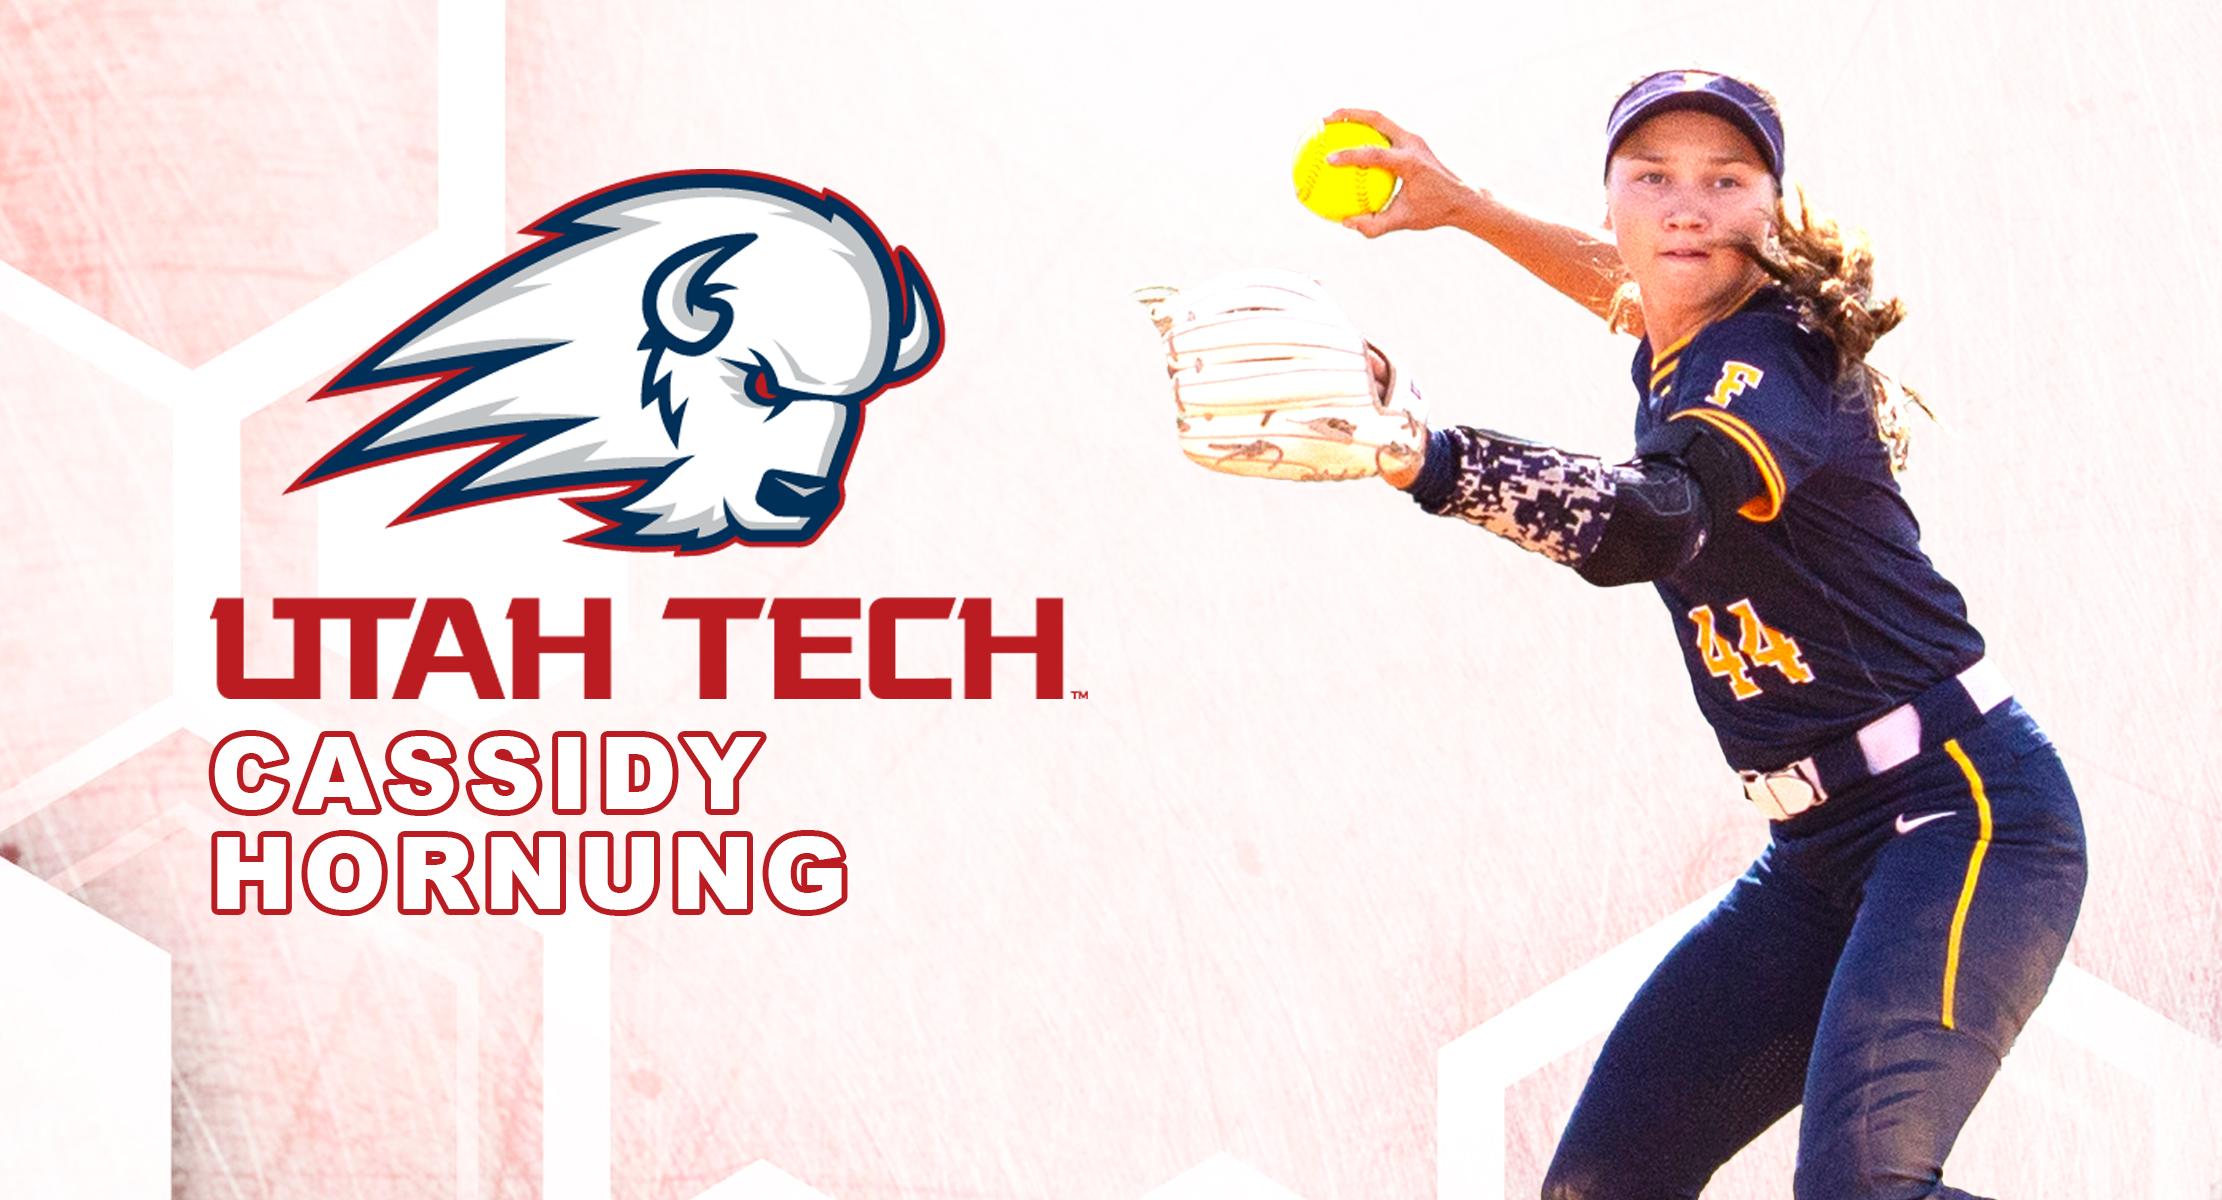 CASSIDY HORNUNG UNITES WITH UTAH TECH